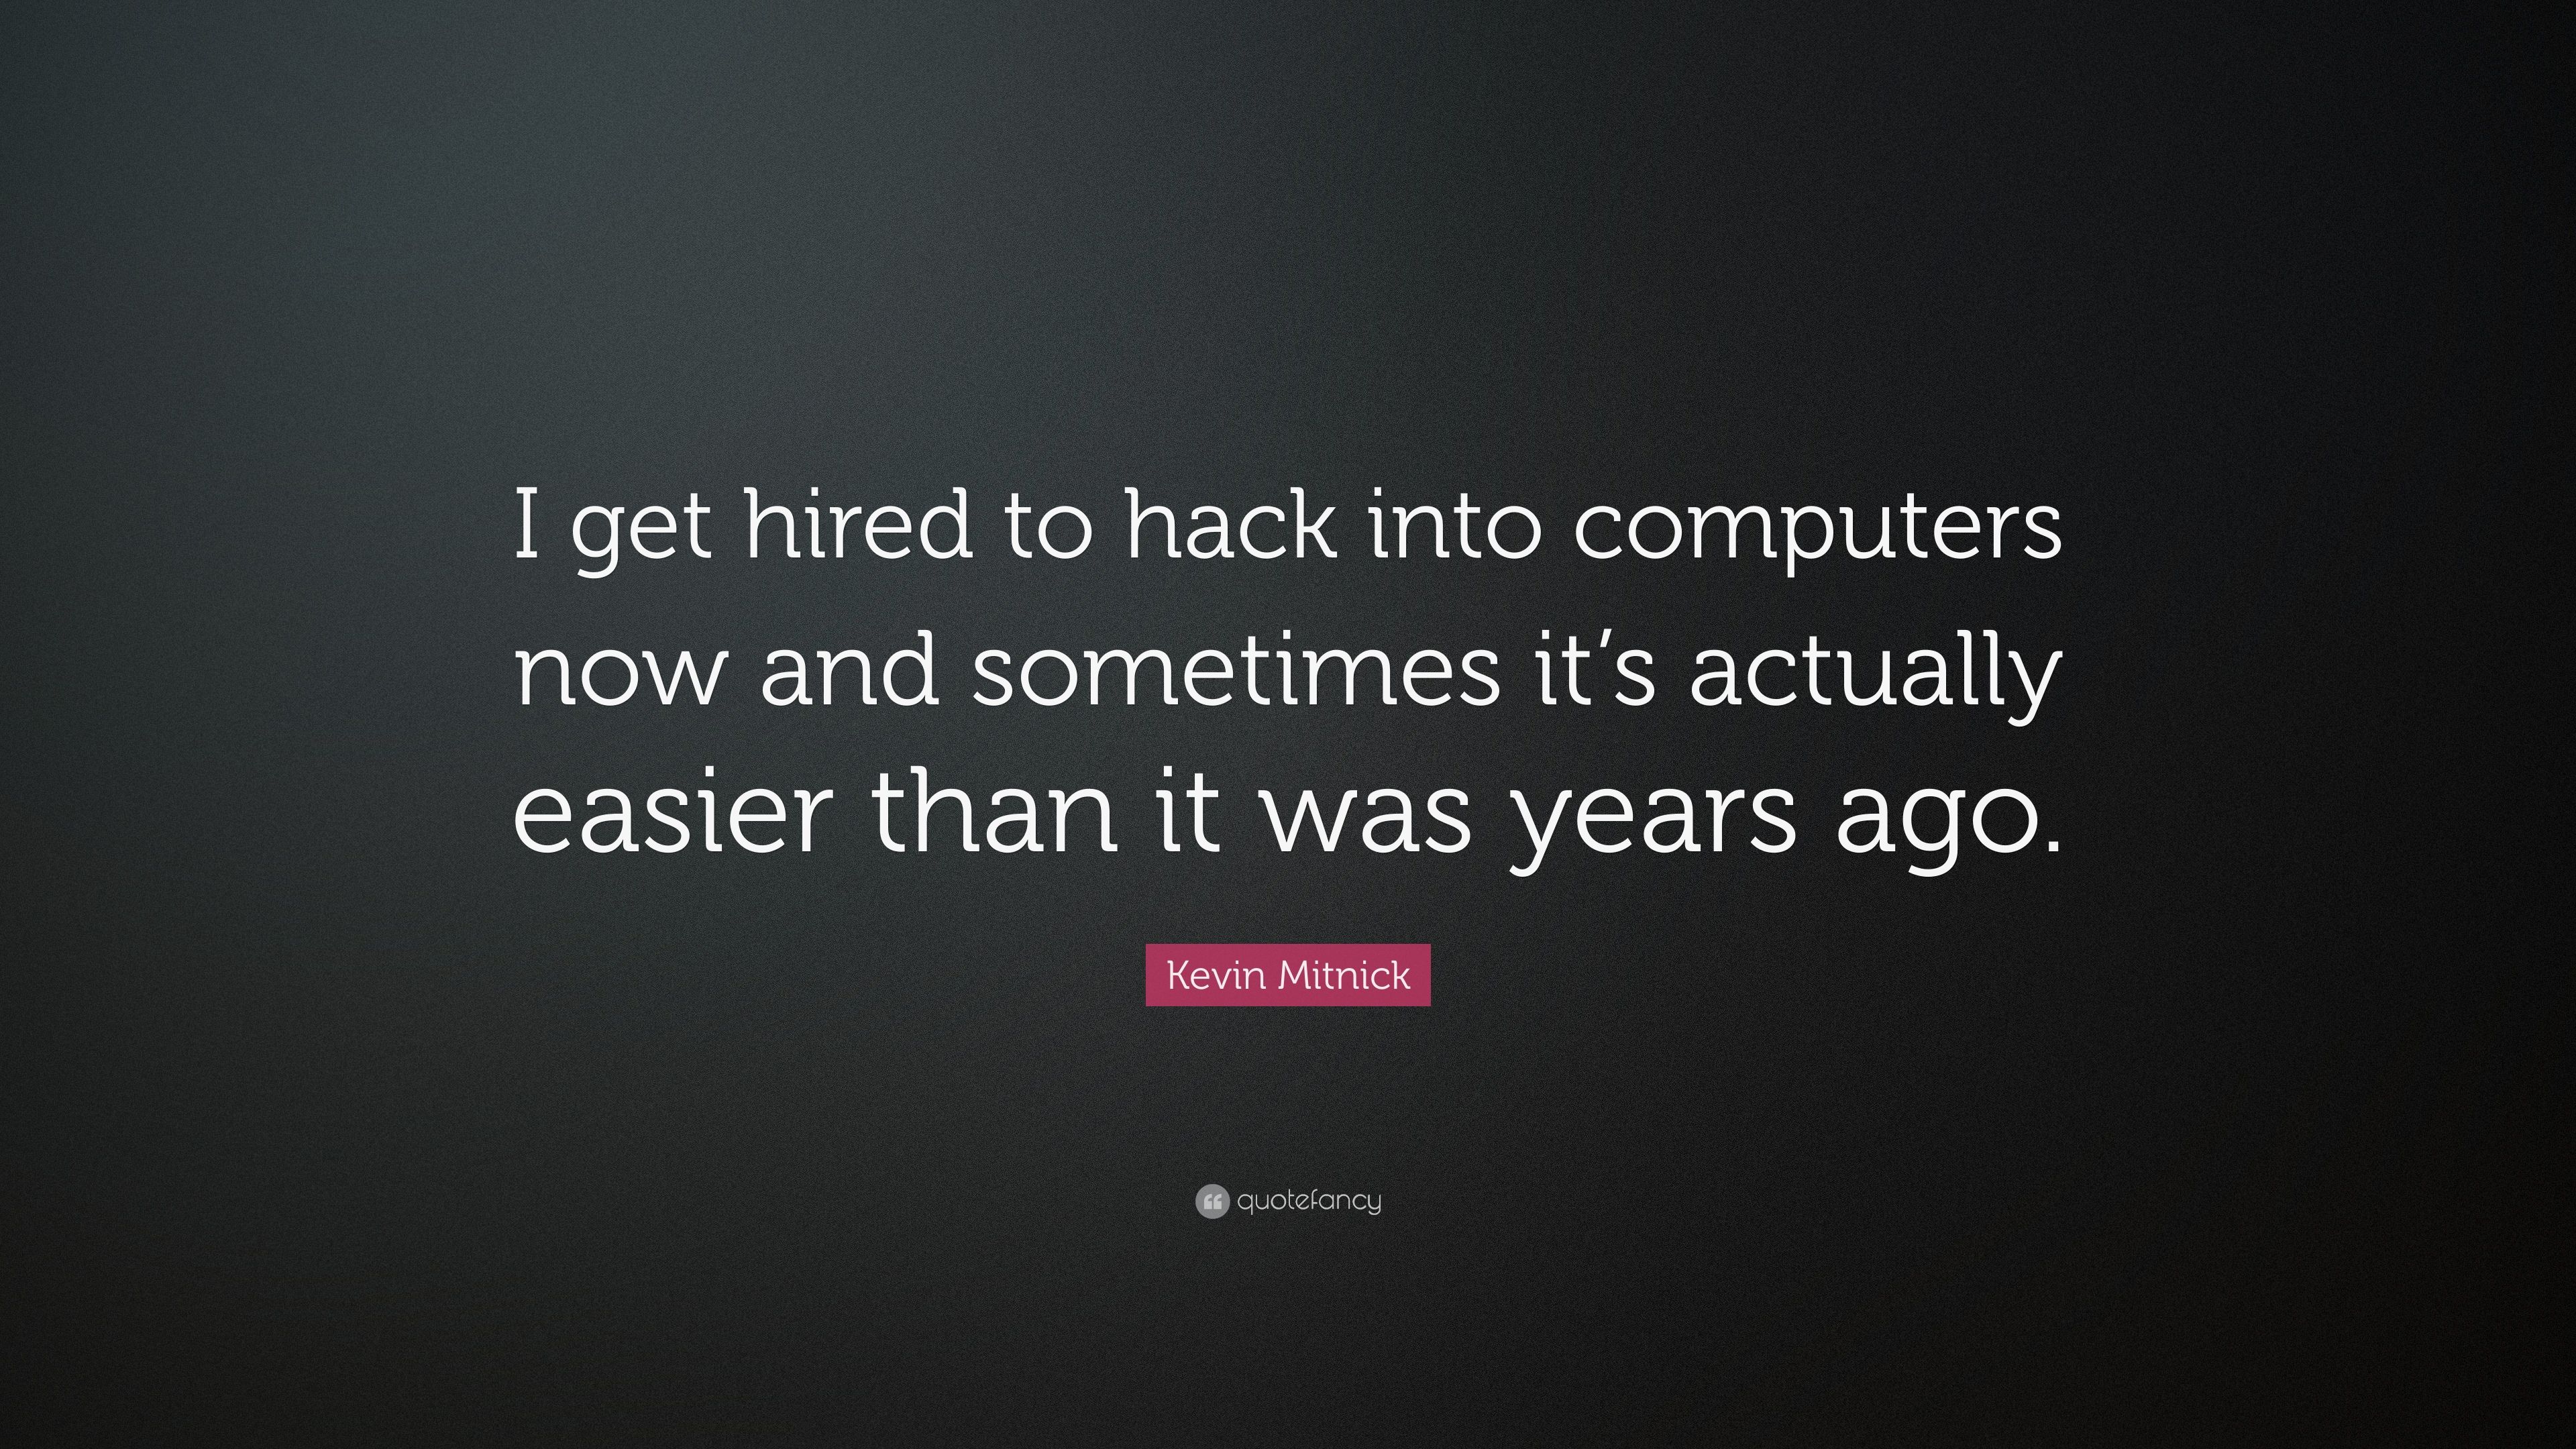 Kevin Mitnick Quote: “I get hired to hack into computers now and sometimes it's actually easier